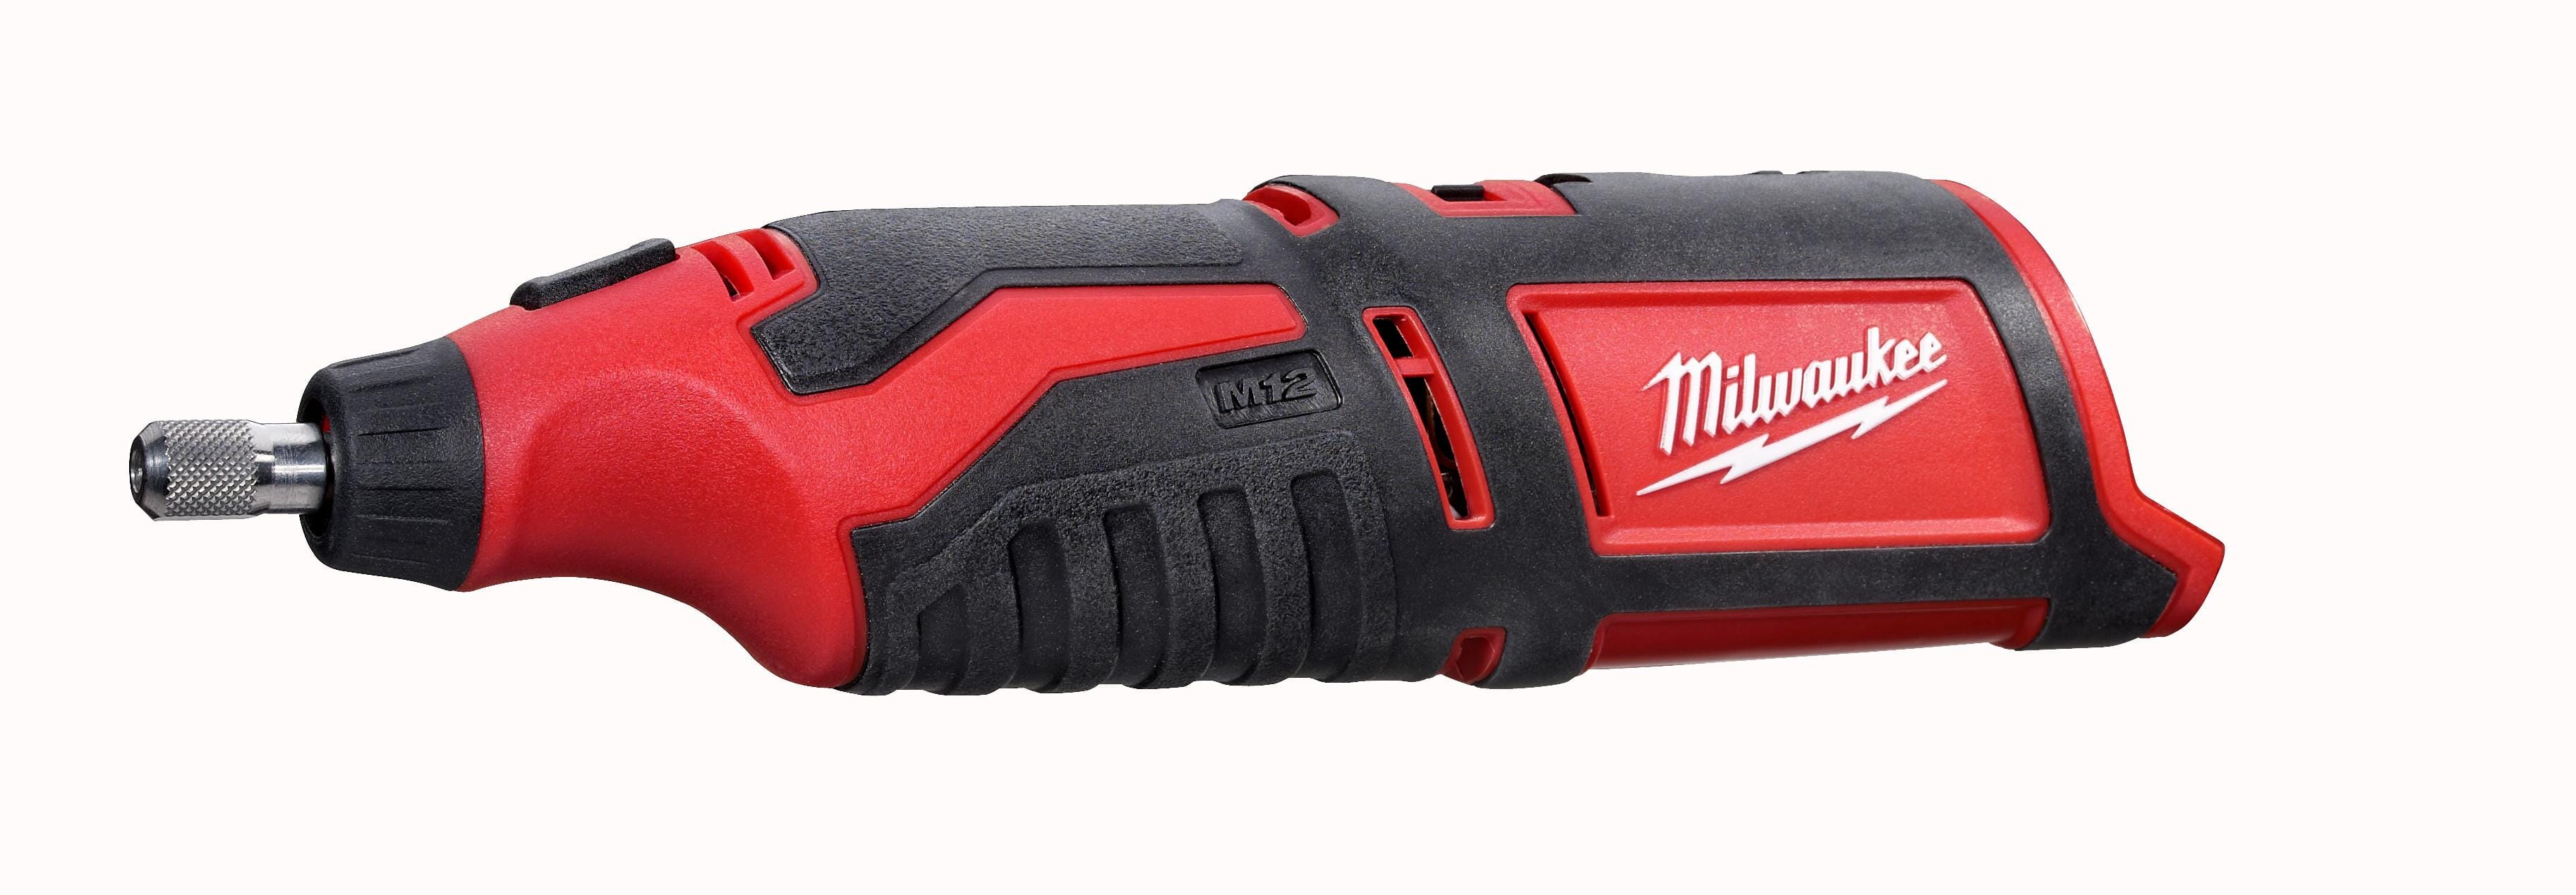 Milwaukee M12 2460-20 Cordless Rotary Tool, 12 VDC, 5000 to 32000 rpm Speed, Lithium-Ion Battery, Slide ON/OFF With Speed Dial Switch